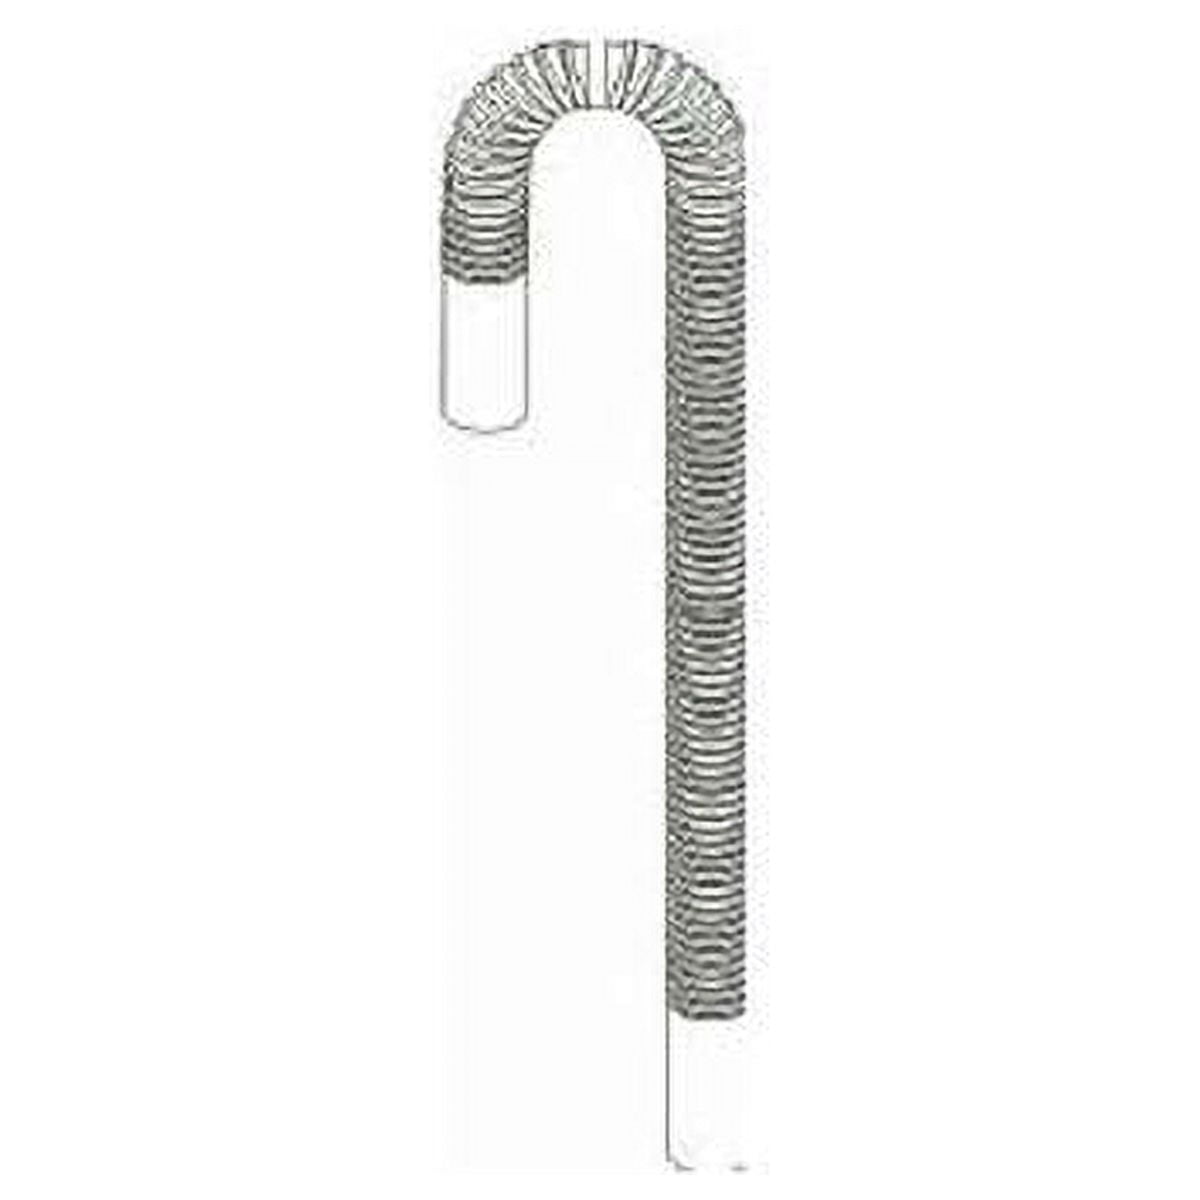 Watflow Ice Maker Hose with 1/4 Comp by 1/4 Comp Connection, 5F Flexible  Braided Stainless Steel Hose